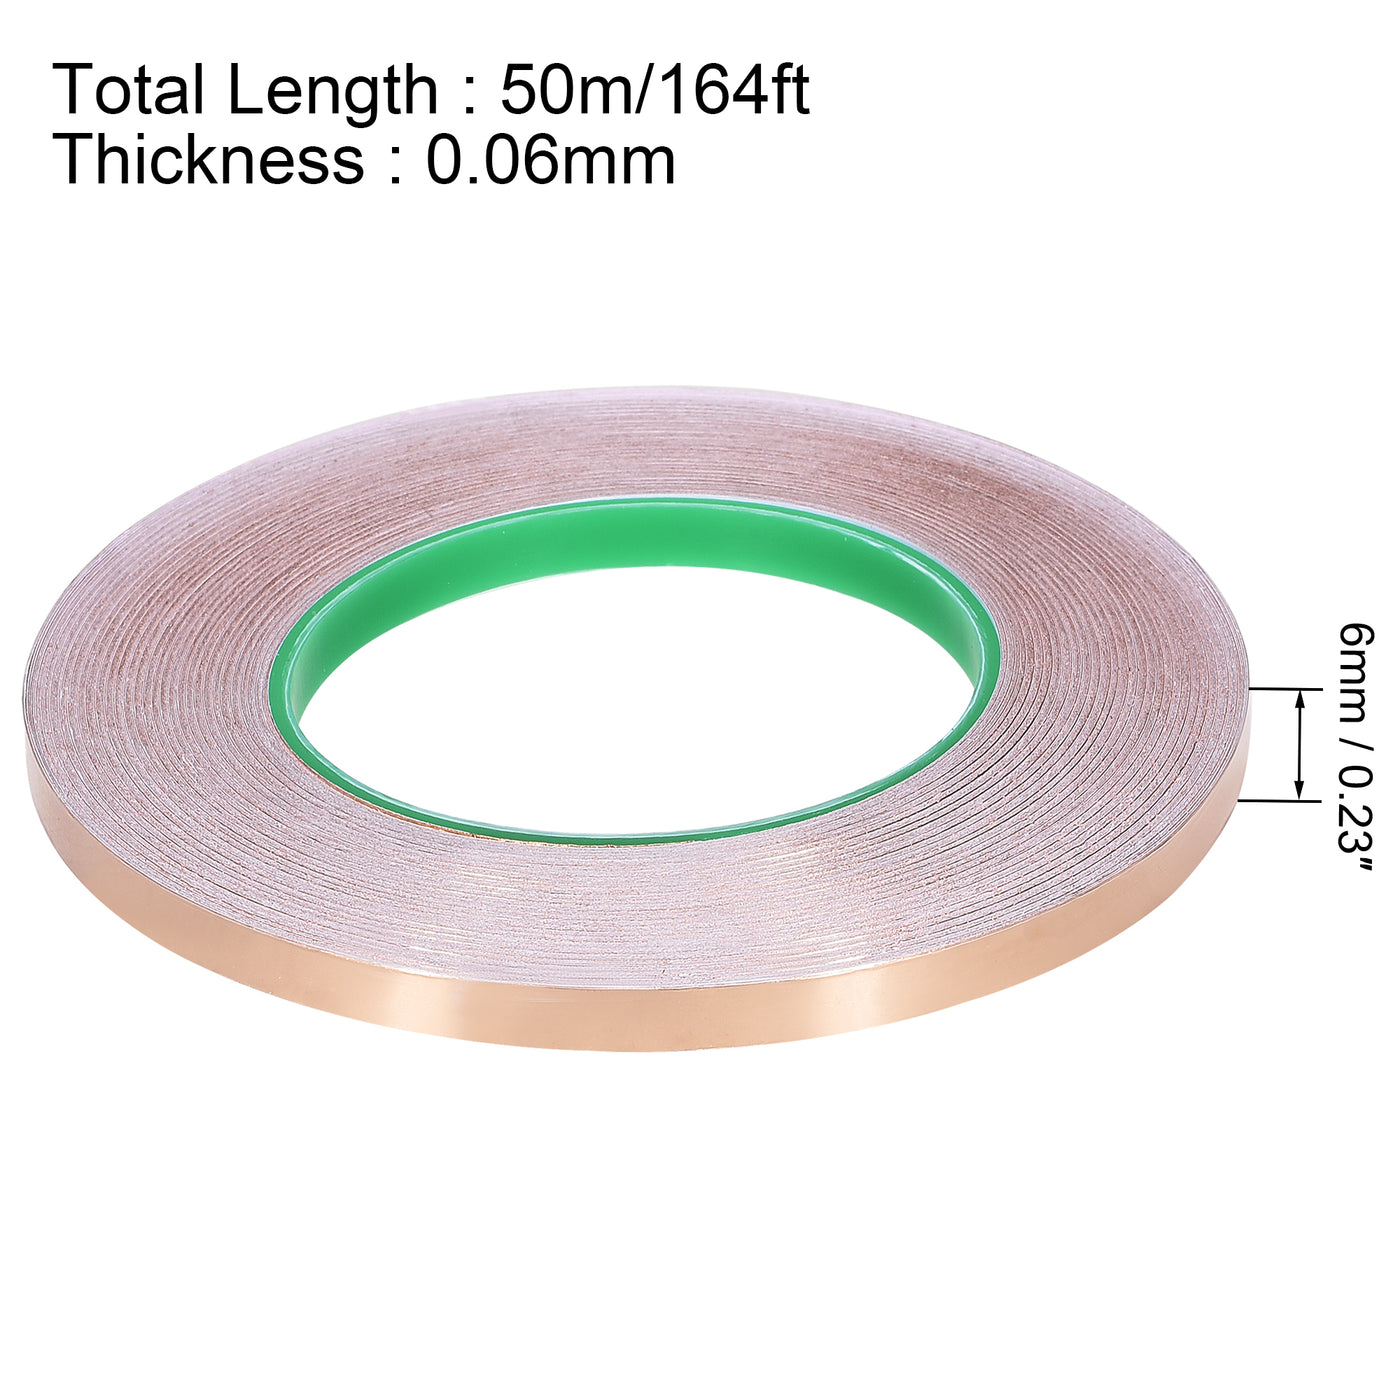 uxcell Uxcell Double-Sided Conductive Tape Copper Foil Tape 6mm x 50m/164ft for EMI Shielding 1pcs